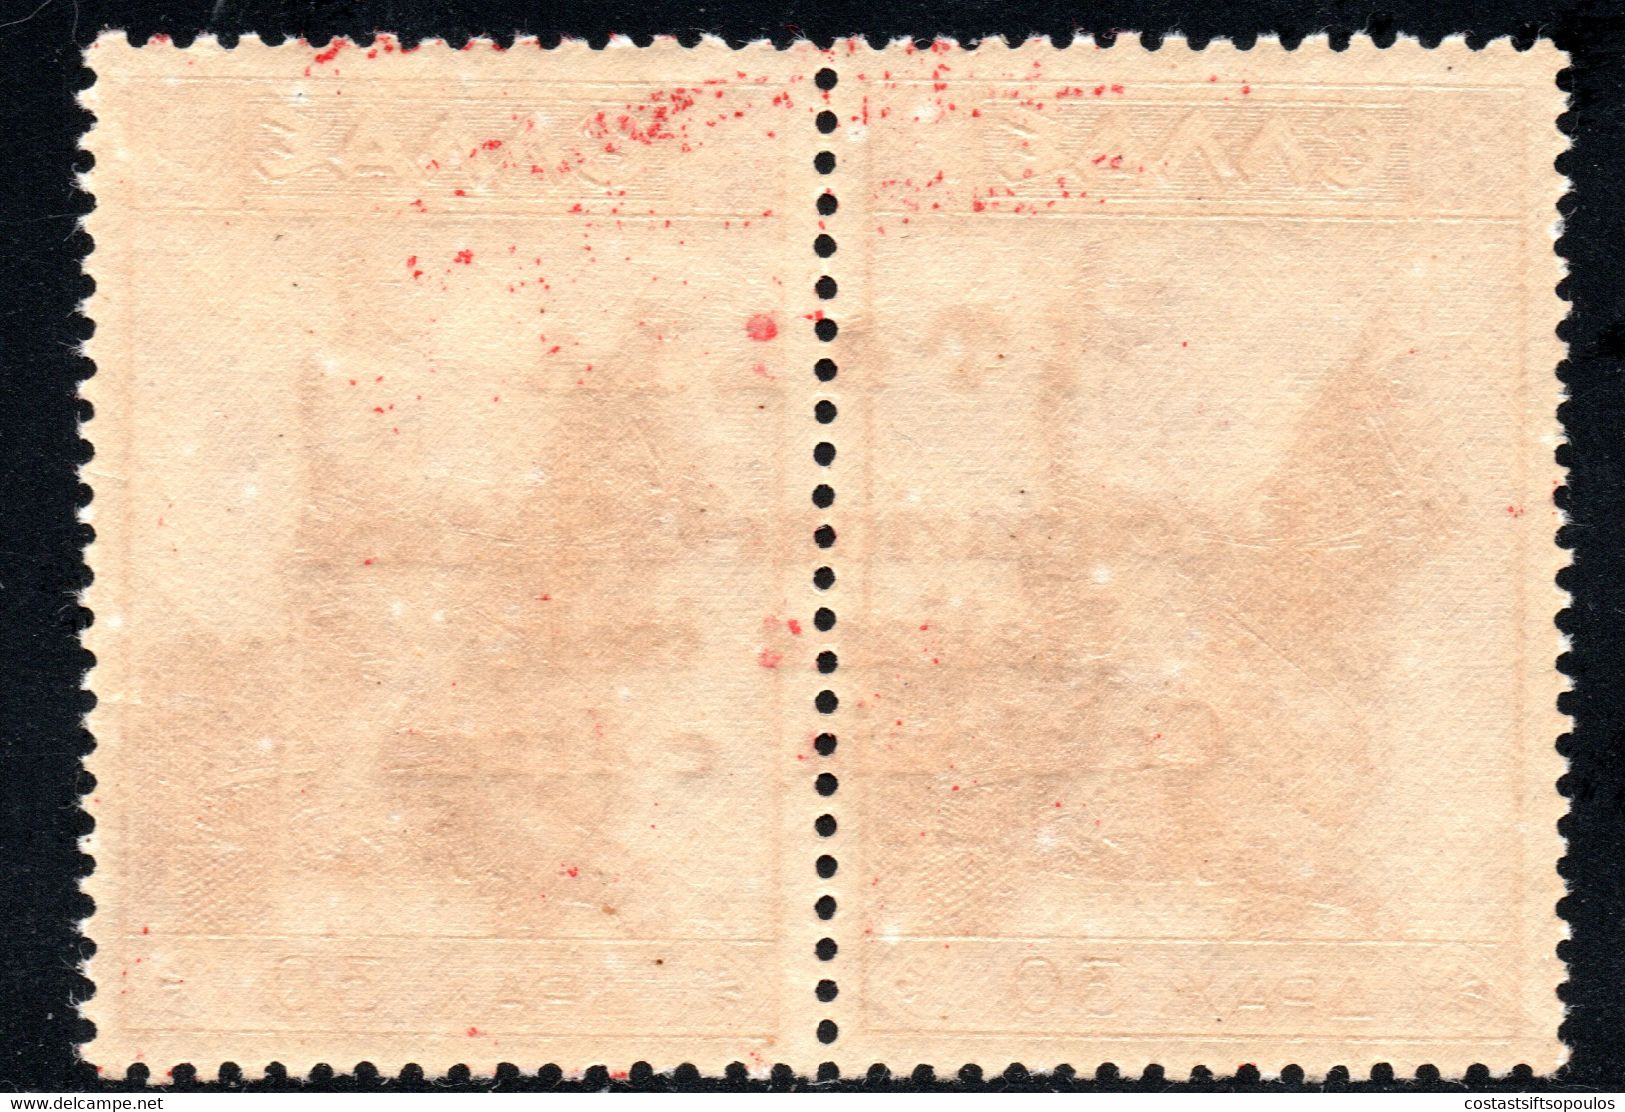 165.GREECE,ITALY,IONIAN,CEFALONIA,1941 30DR.RIDER,RED OVERPRINT???,MNH,POSSIBLY PRIVATE - Isole Ioniche